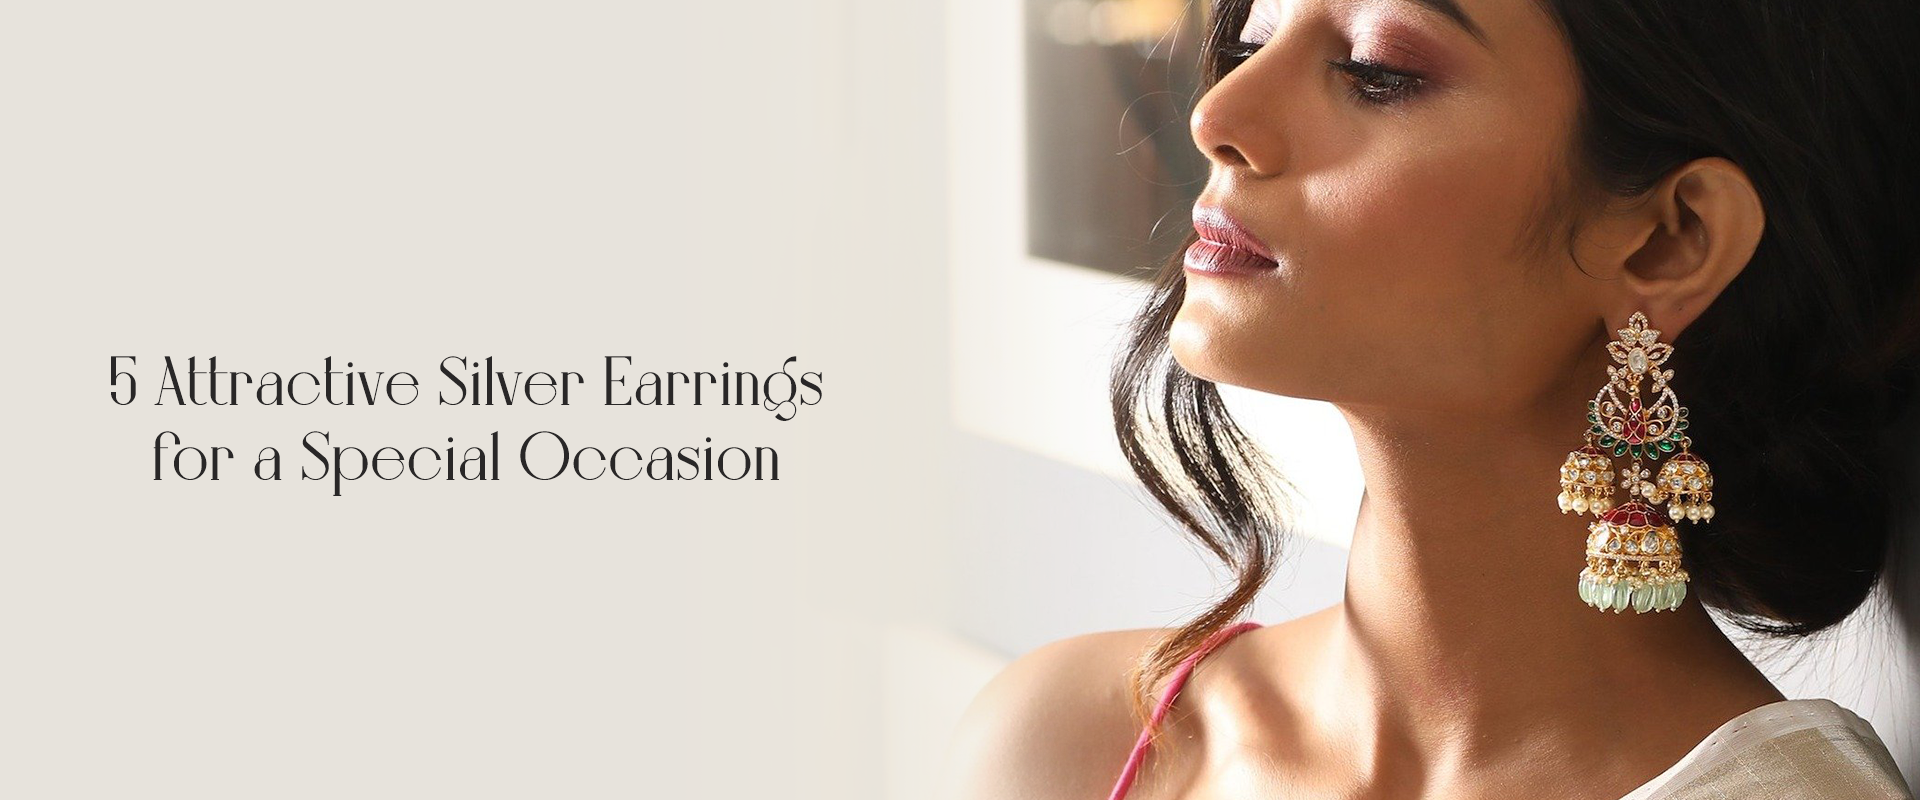 5 Attractive Silver Earrings for a Special Occasion